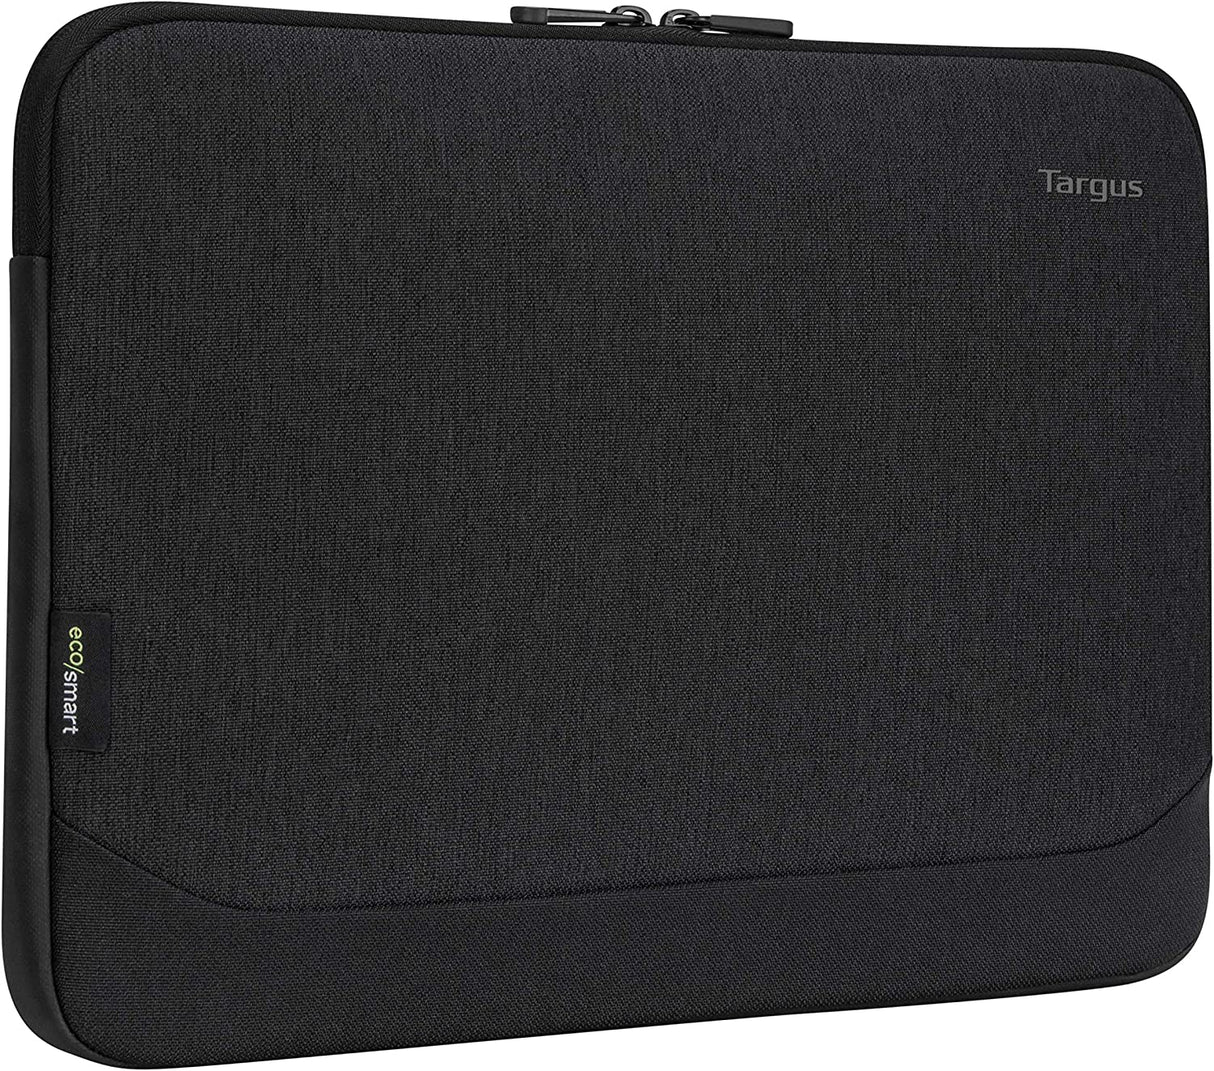 Targus Cypress Sleeve with EcoSmart Modern Style with Durable Water-Repellent Nylon, Back Zip Pocket Pouch, Protective Slipcase fits 13-14-Inch Laptop/Notebook, Black (TBS646GL) Black Sleeve